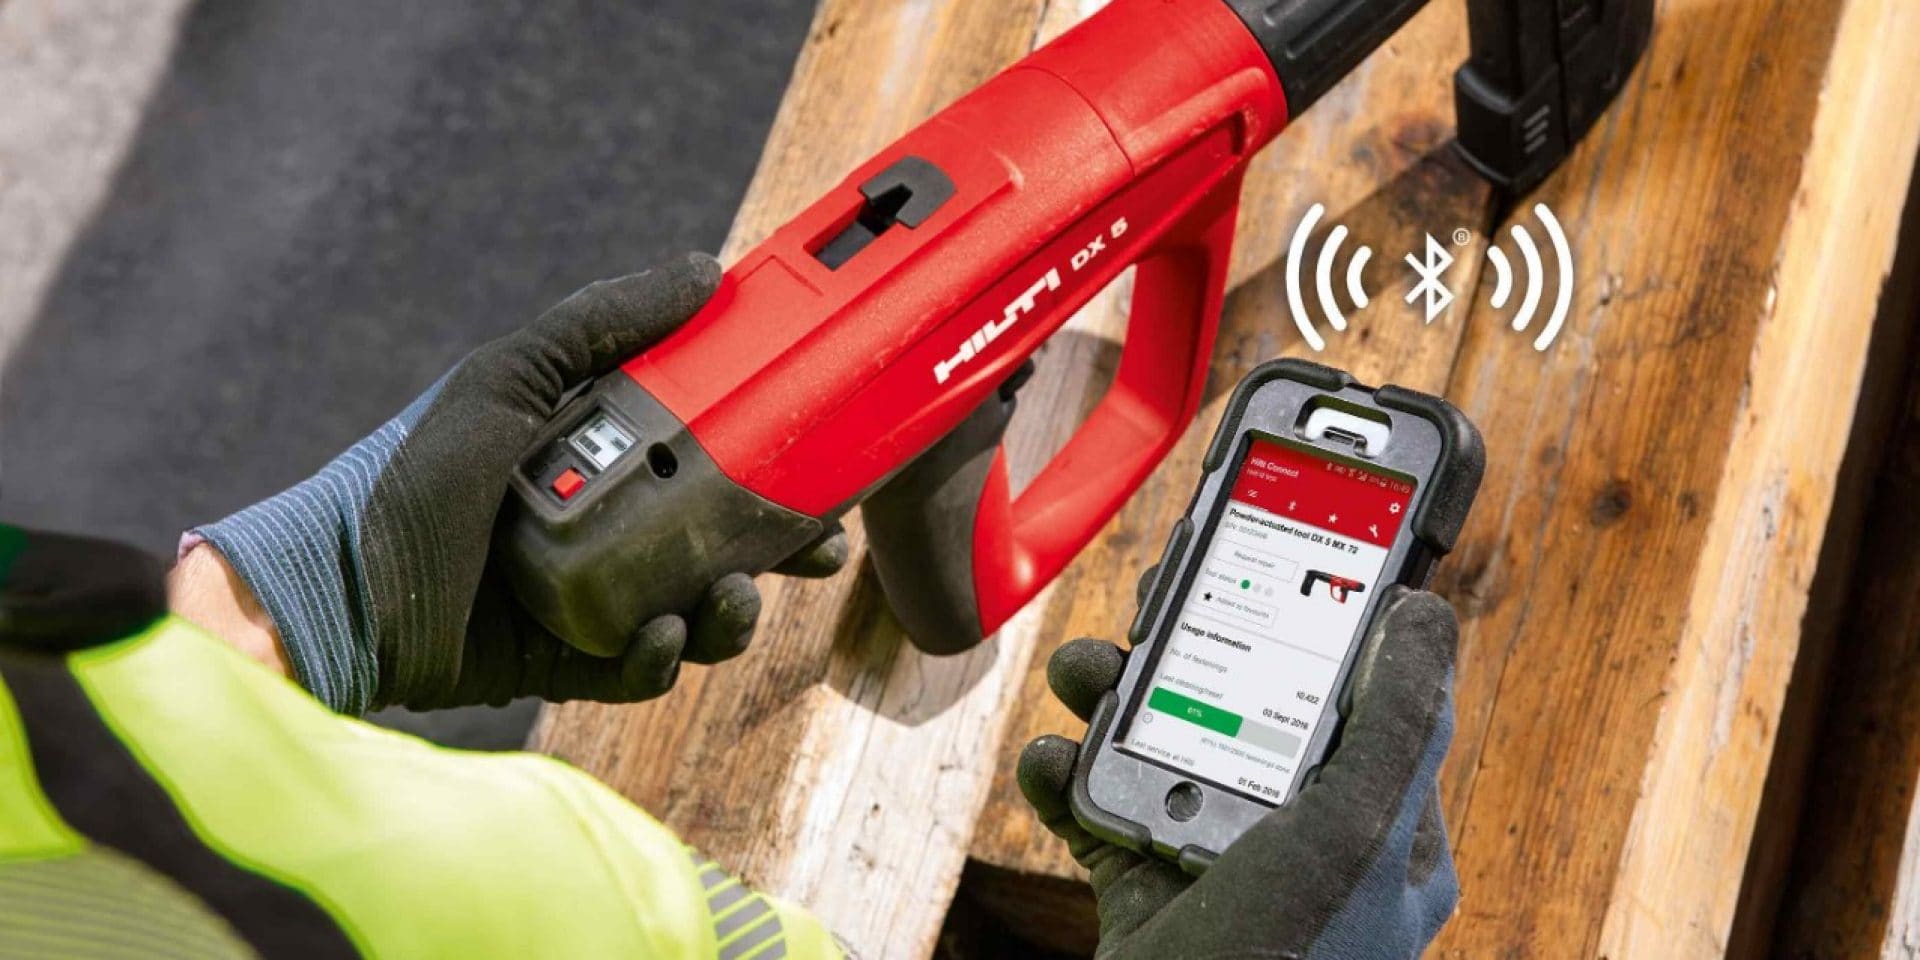 DX 5 powder actuated tool with Connect app